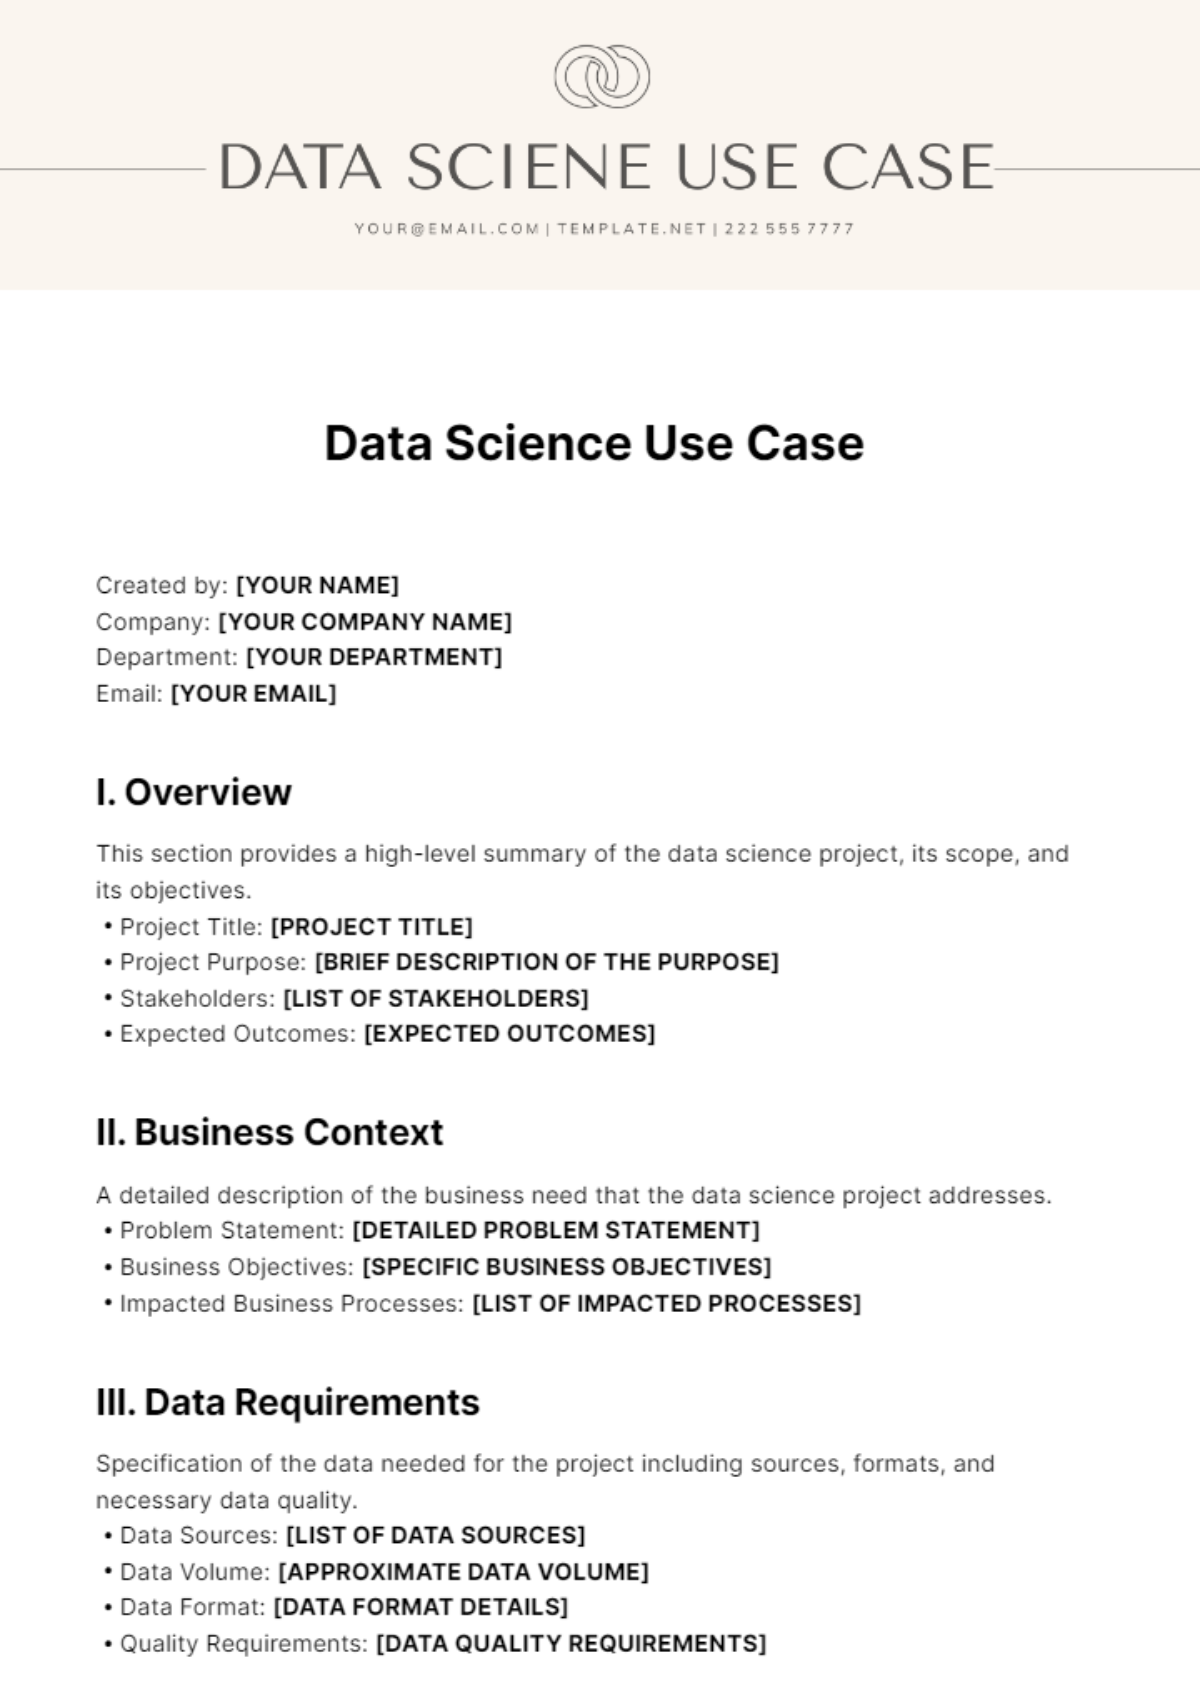 Free Data Science Use Case Template